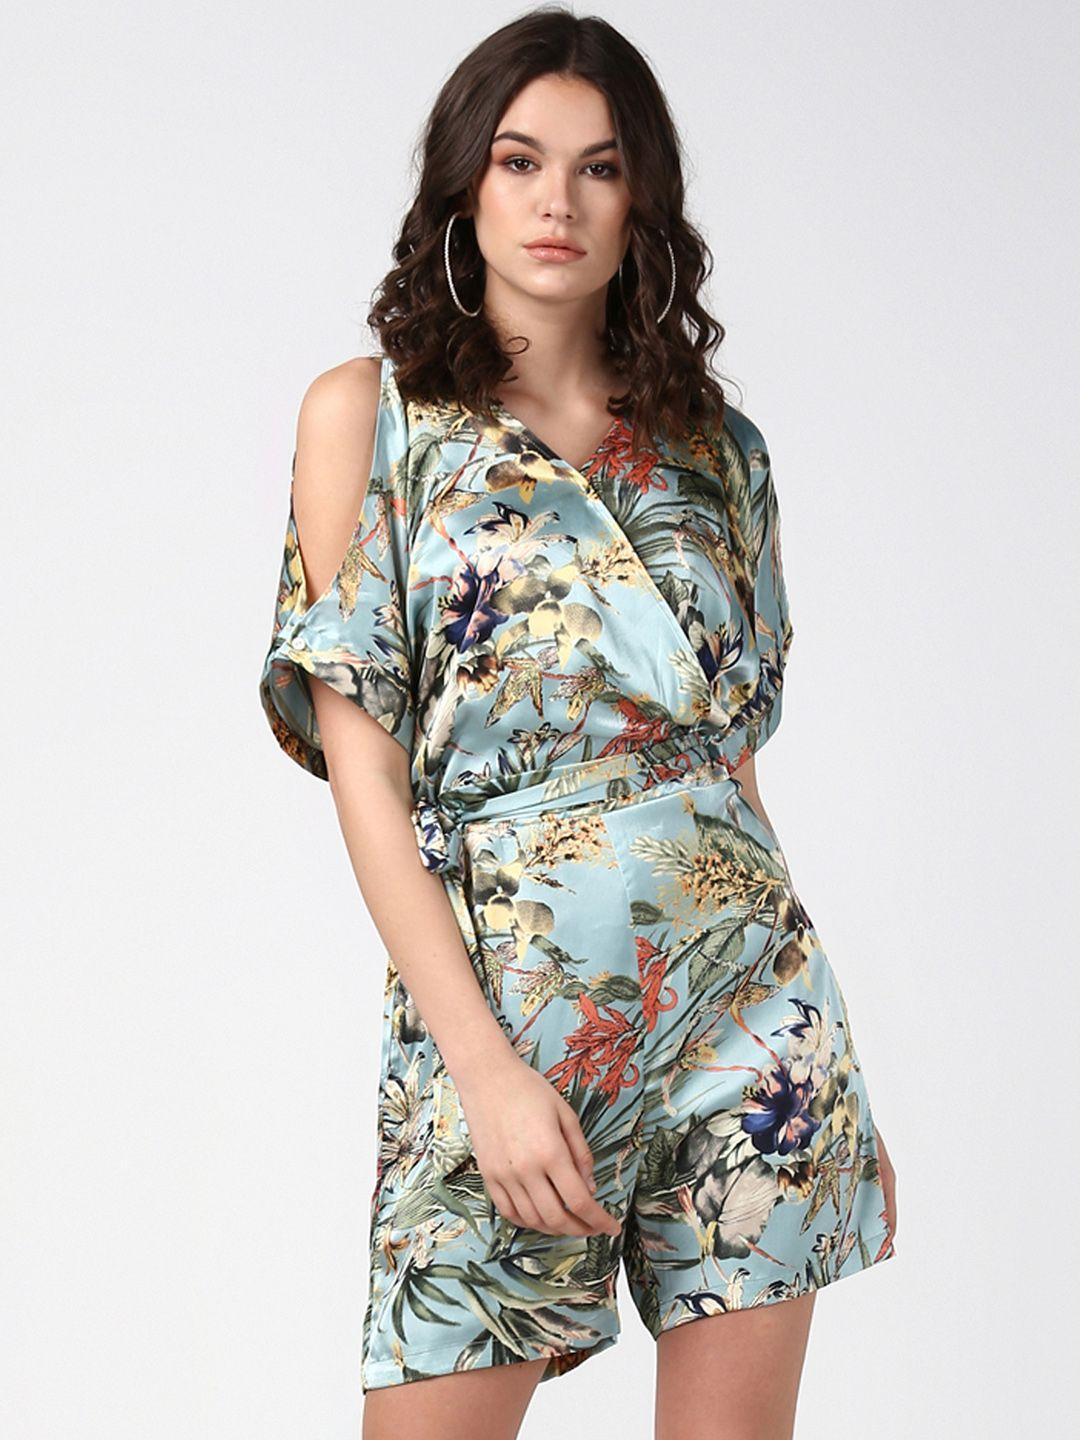 stylestone-women-blue-&-olive-green-tropical-print-cold-shoulder-playsuit